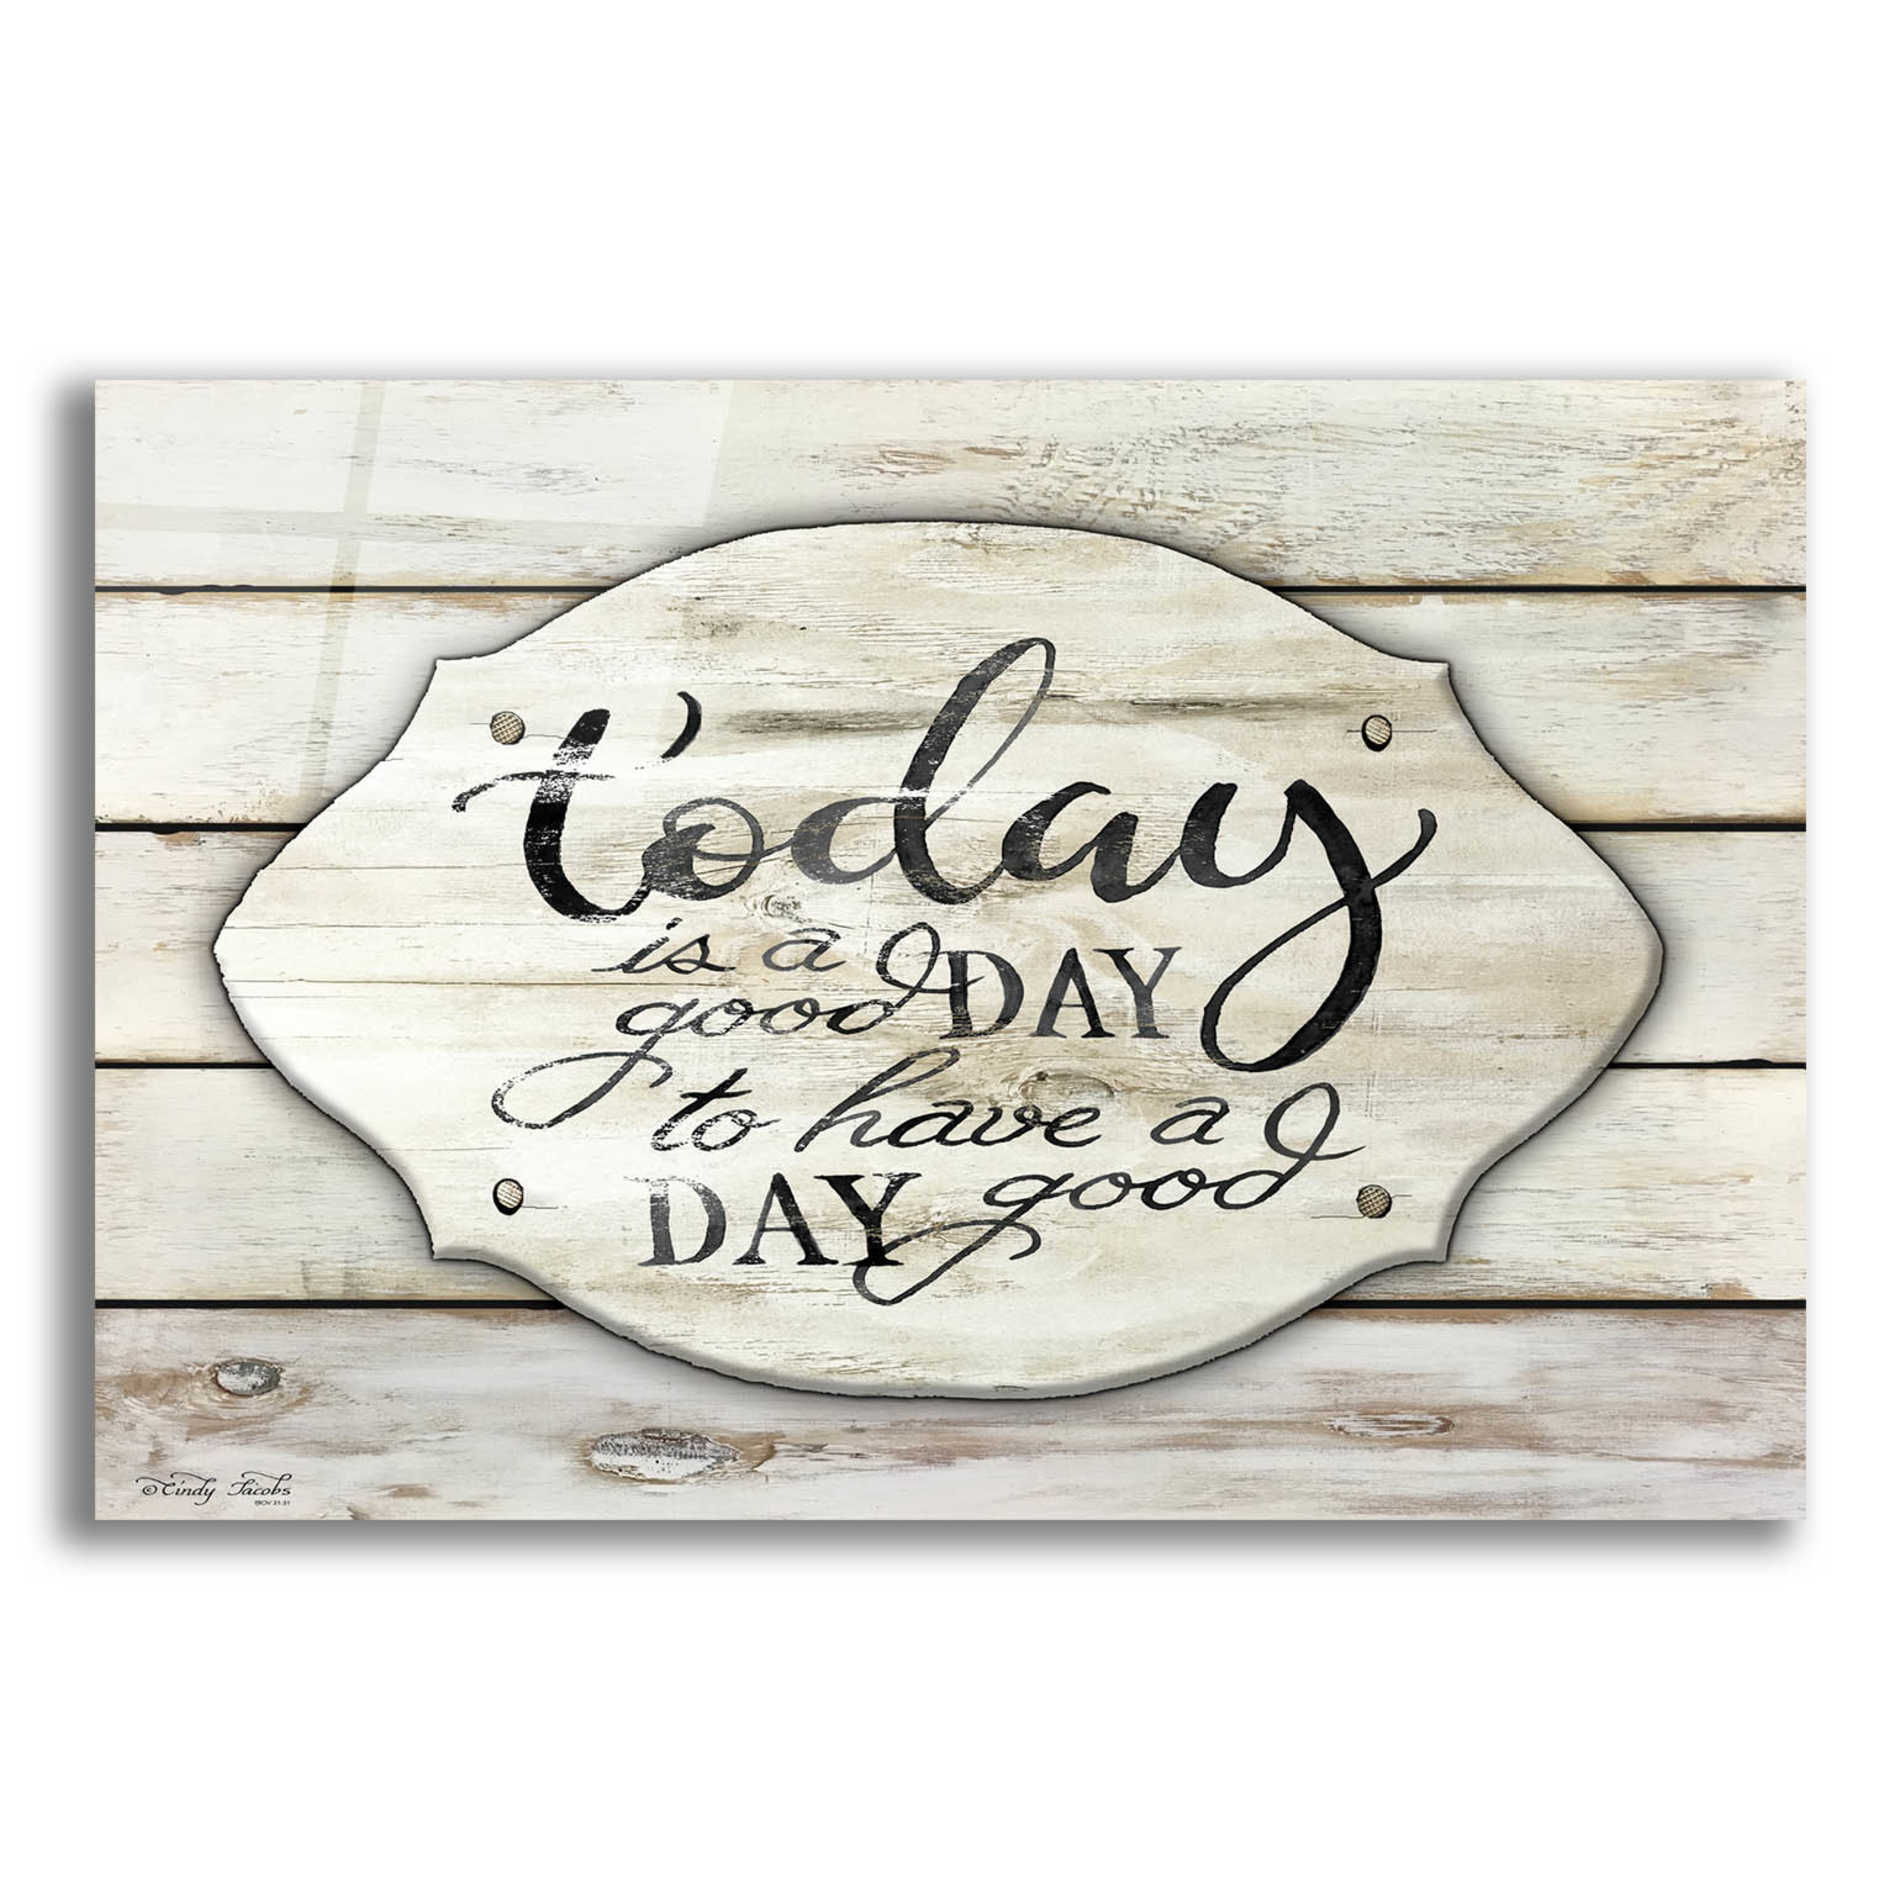 Epic Art 'Today is a Good Day' by Cindy Jacobs, Acrylic Glass Wall Art